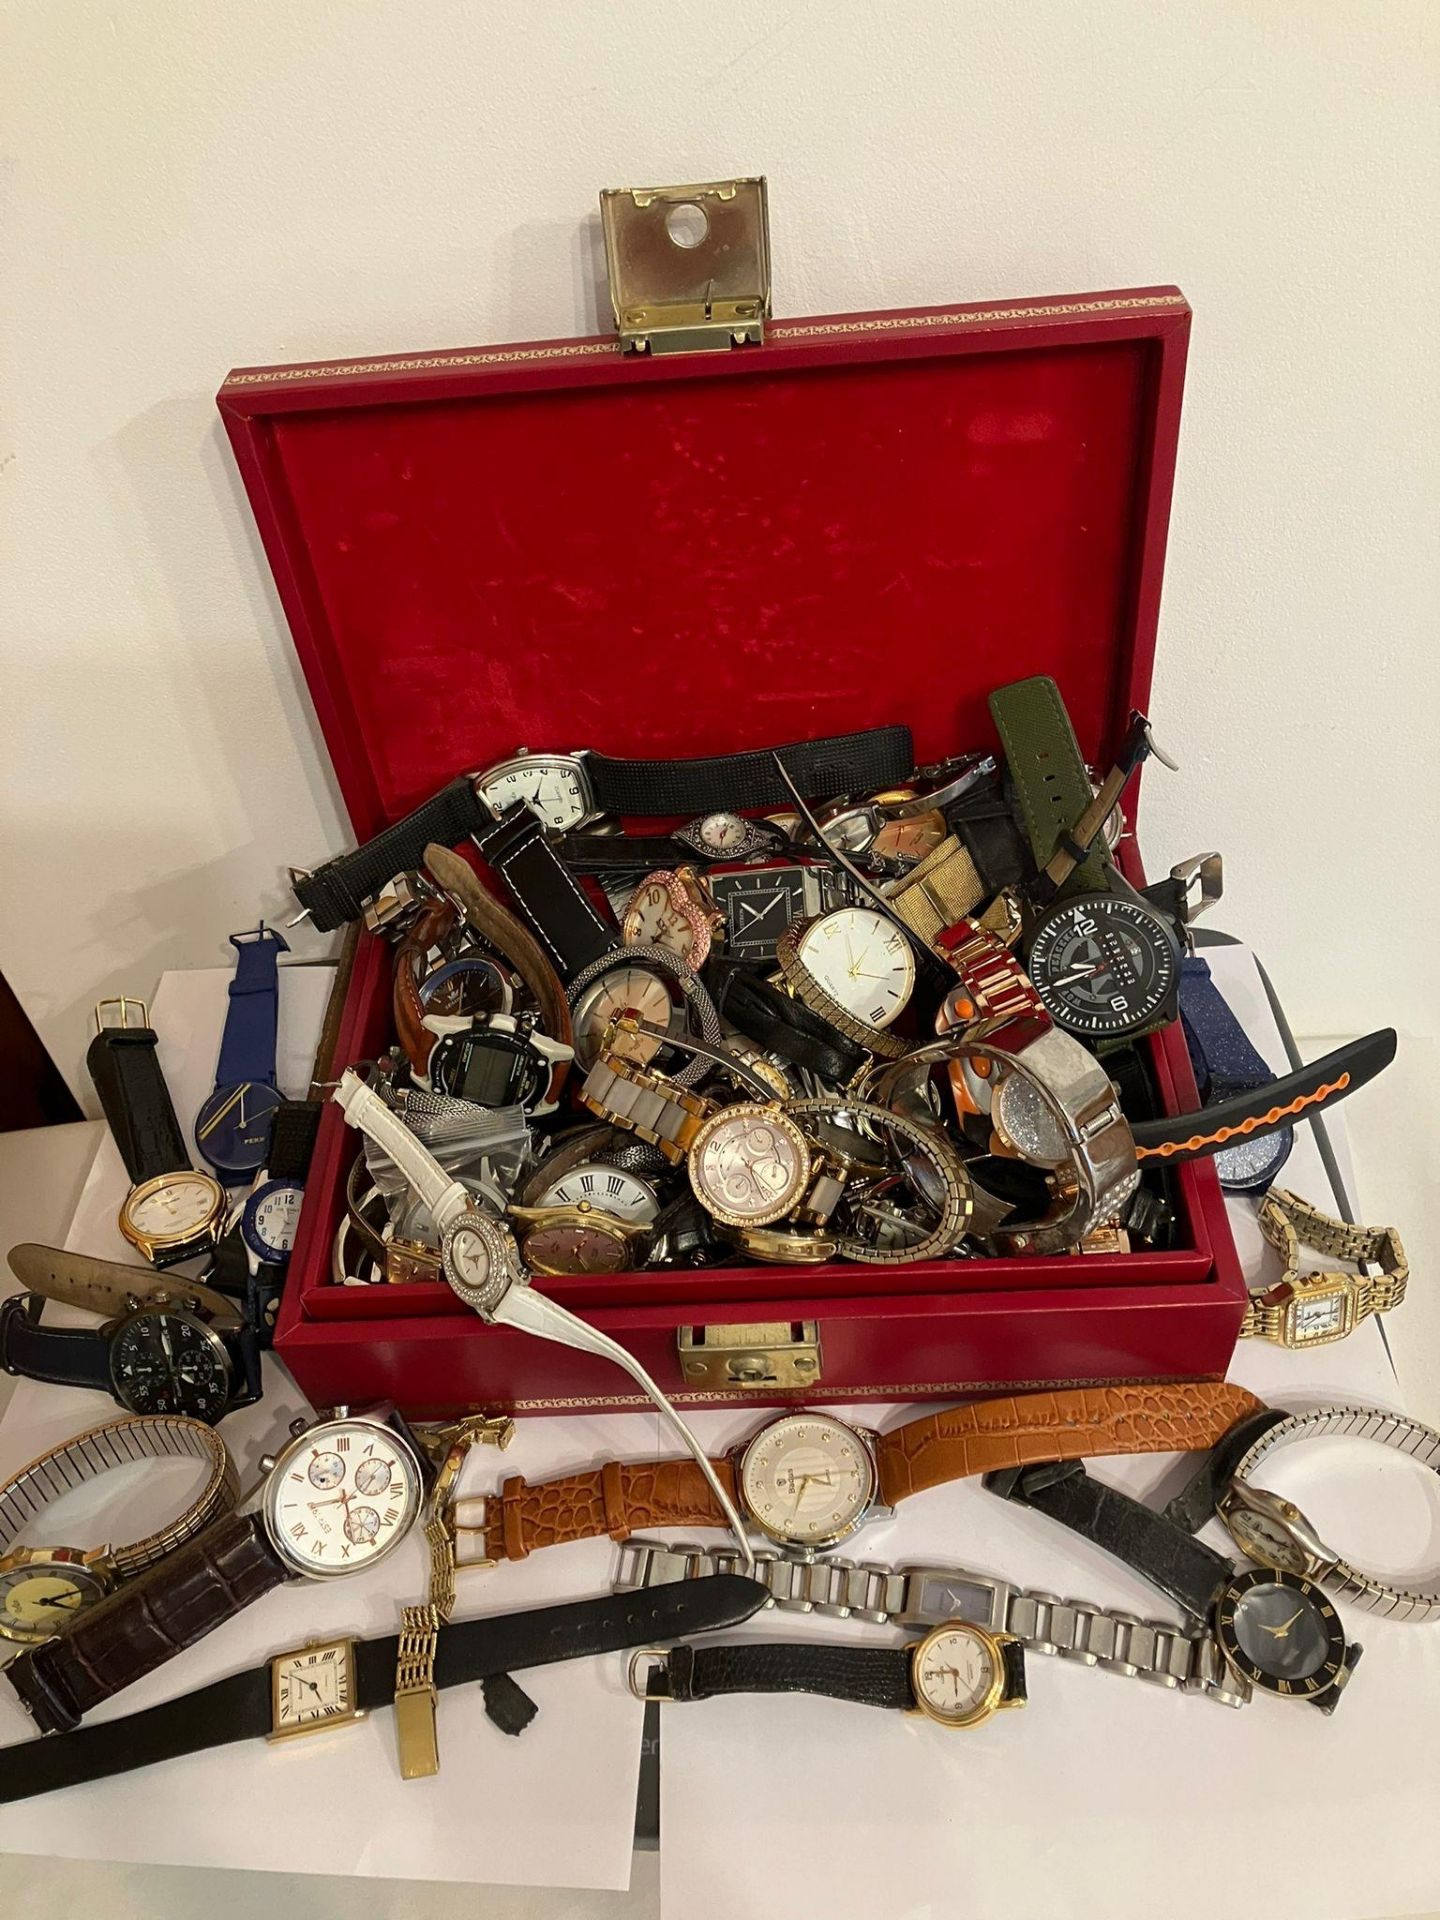 Spares and repairs. Large selection of WRISTWATCHES to be sold for spares and repairs. To include